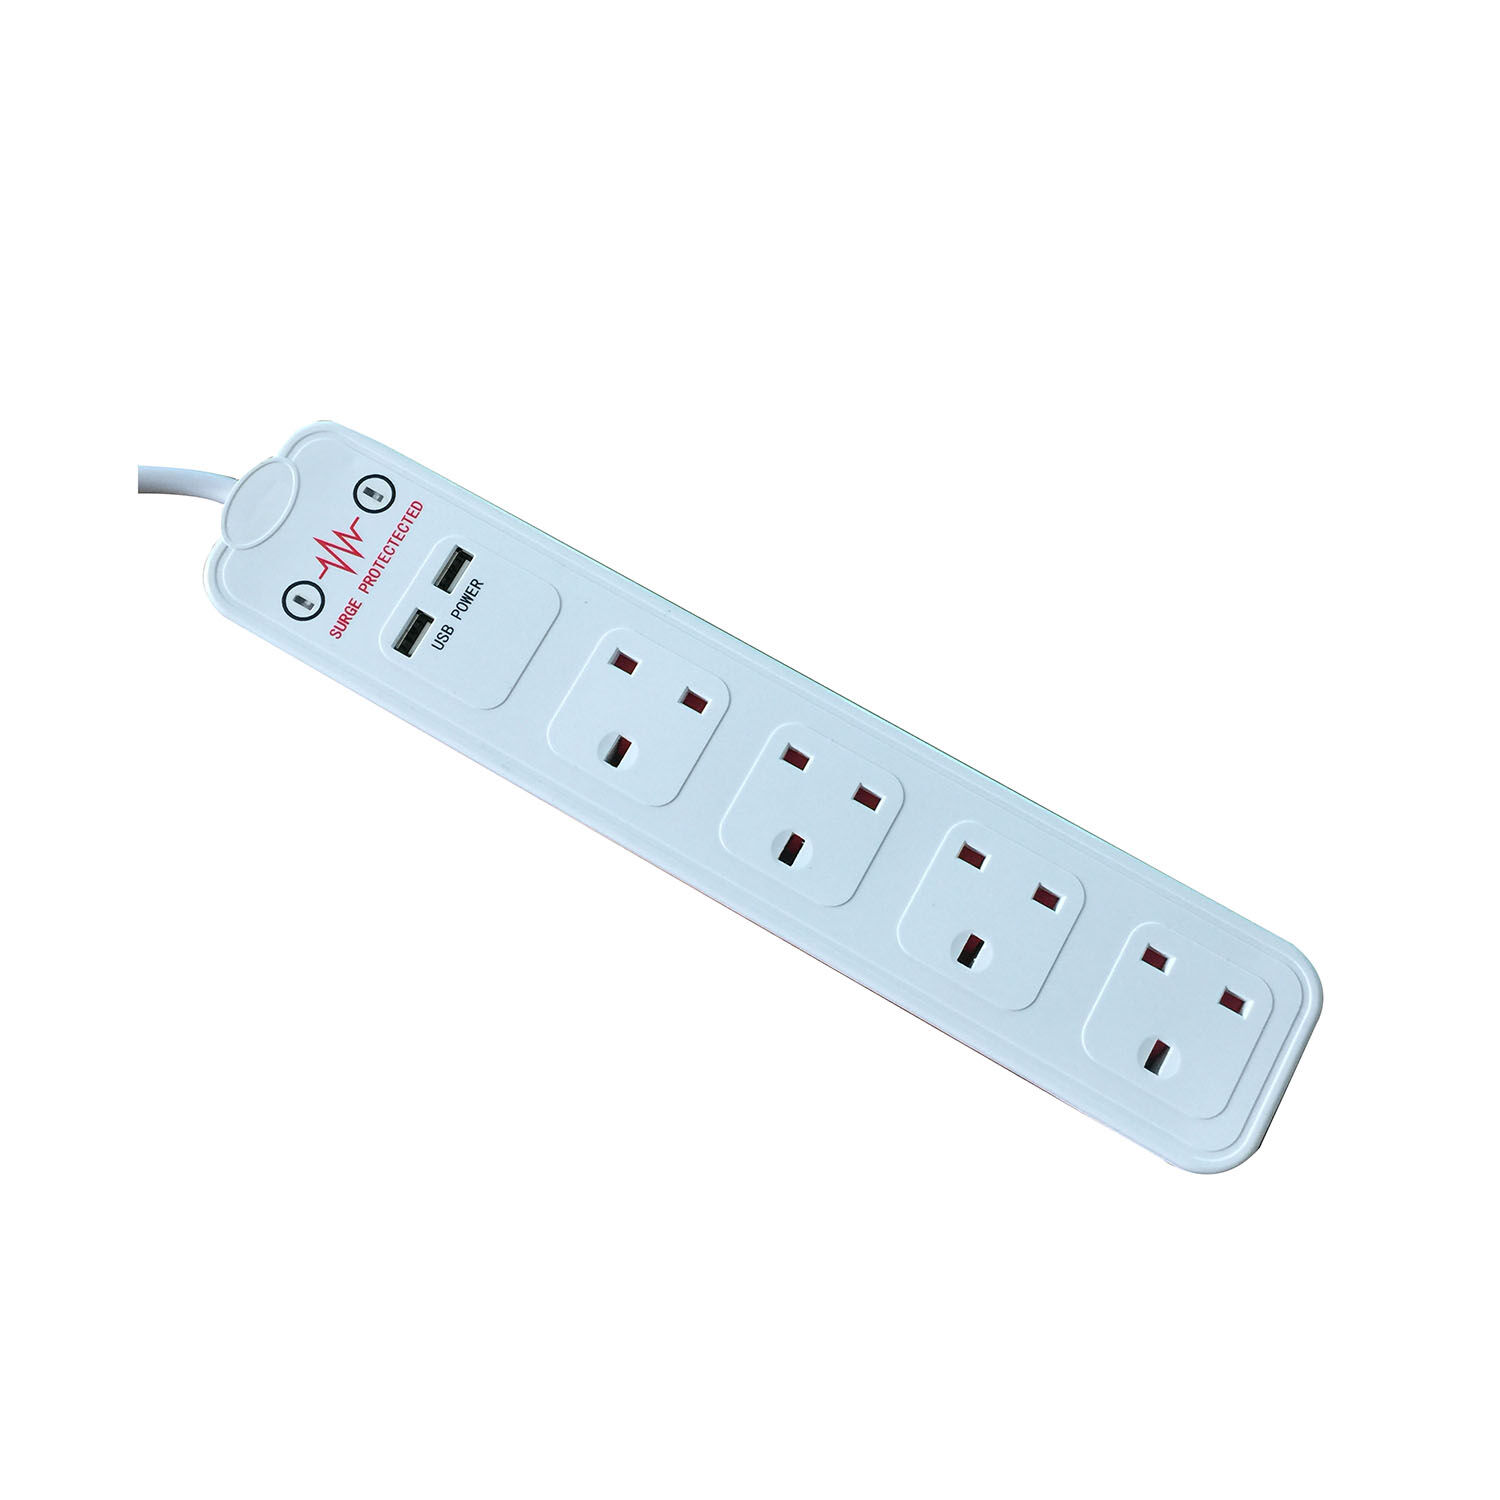 https://www.homestoreandmore.ie/dw/image/v2/BCBN_PRD/on/demandware.static/-/Sites-master/default/dwc6e79b95/images/4-Way-Extension-Lead-with-2-USB-extension-leads-070813-hi-res-0.jpg?sw=1500